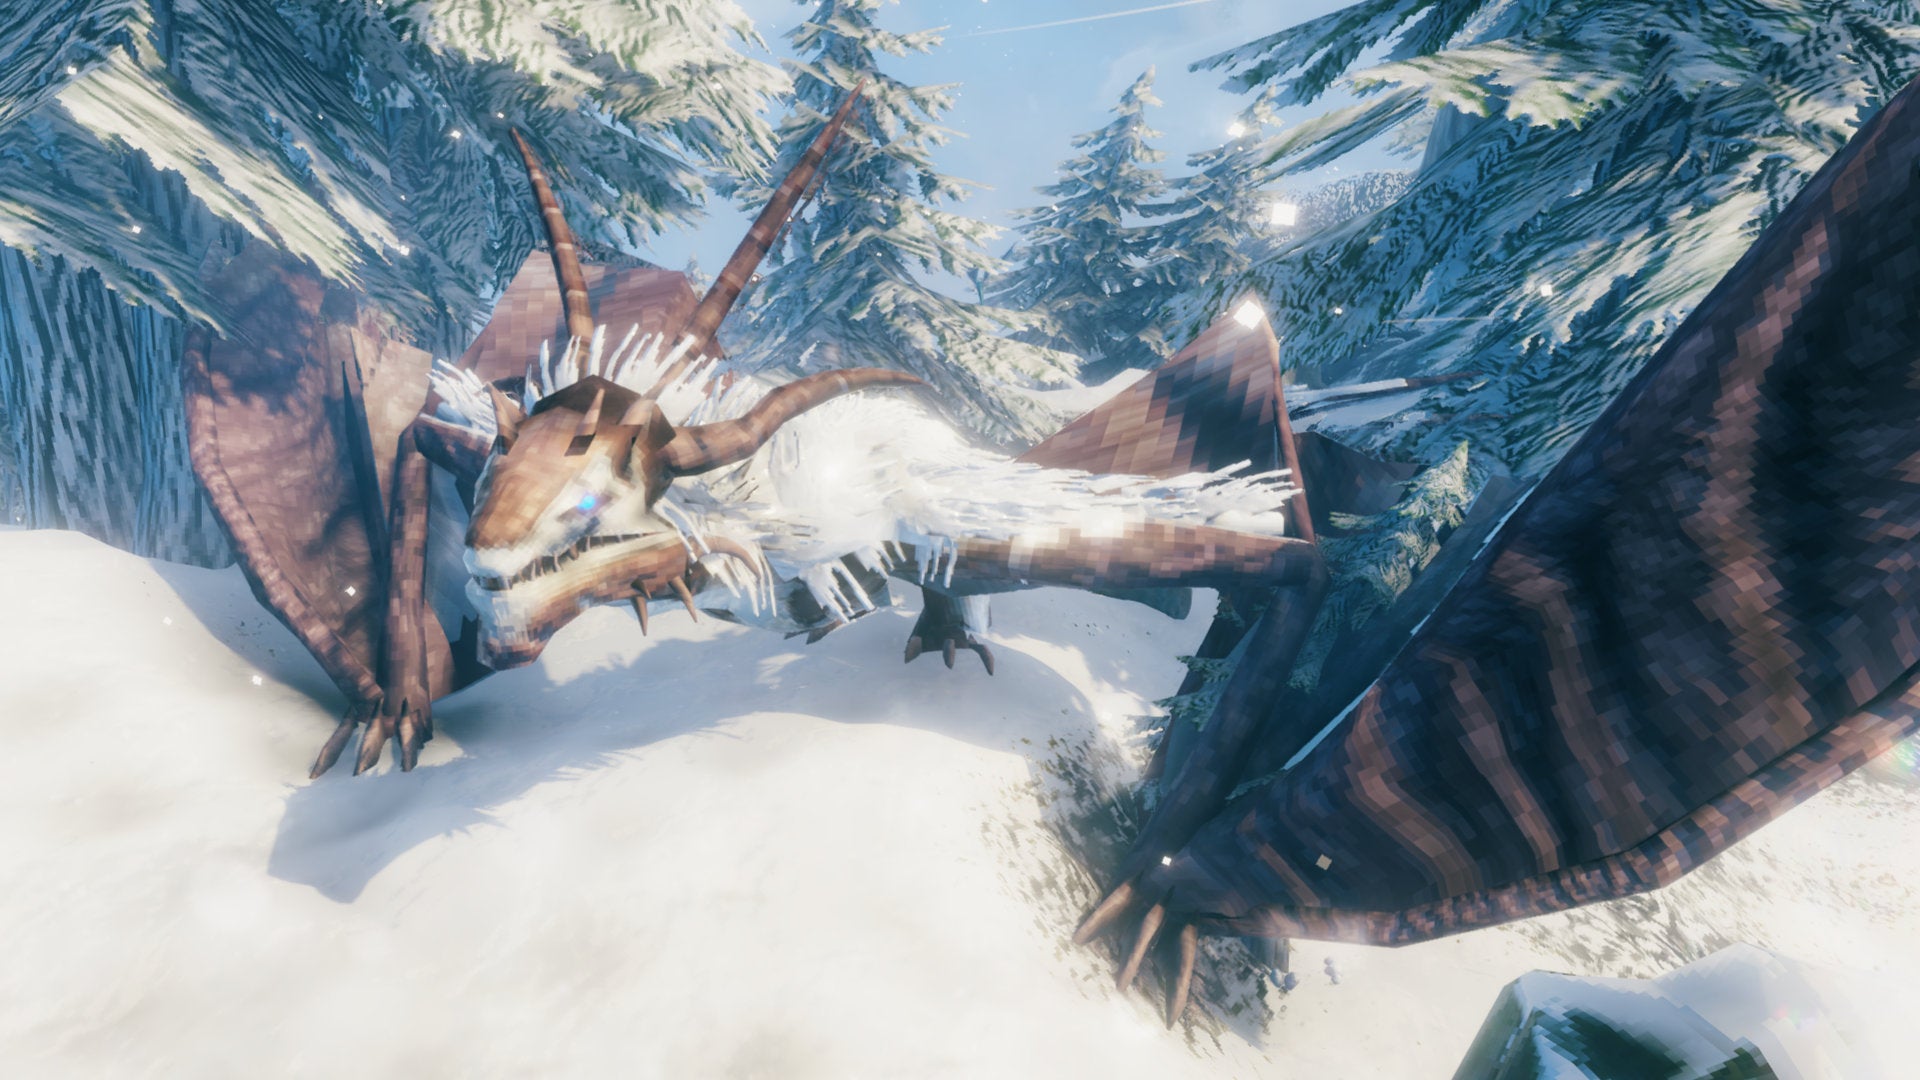 A Valheim screenshot of Moder, the fourth boss, crawling through the snow in a Mountains biome.